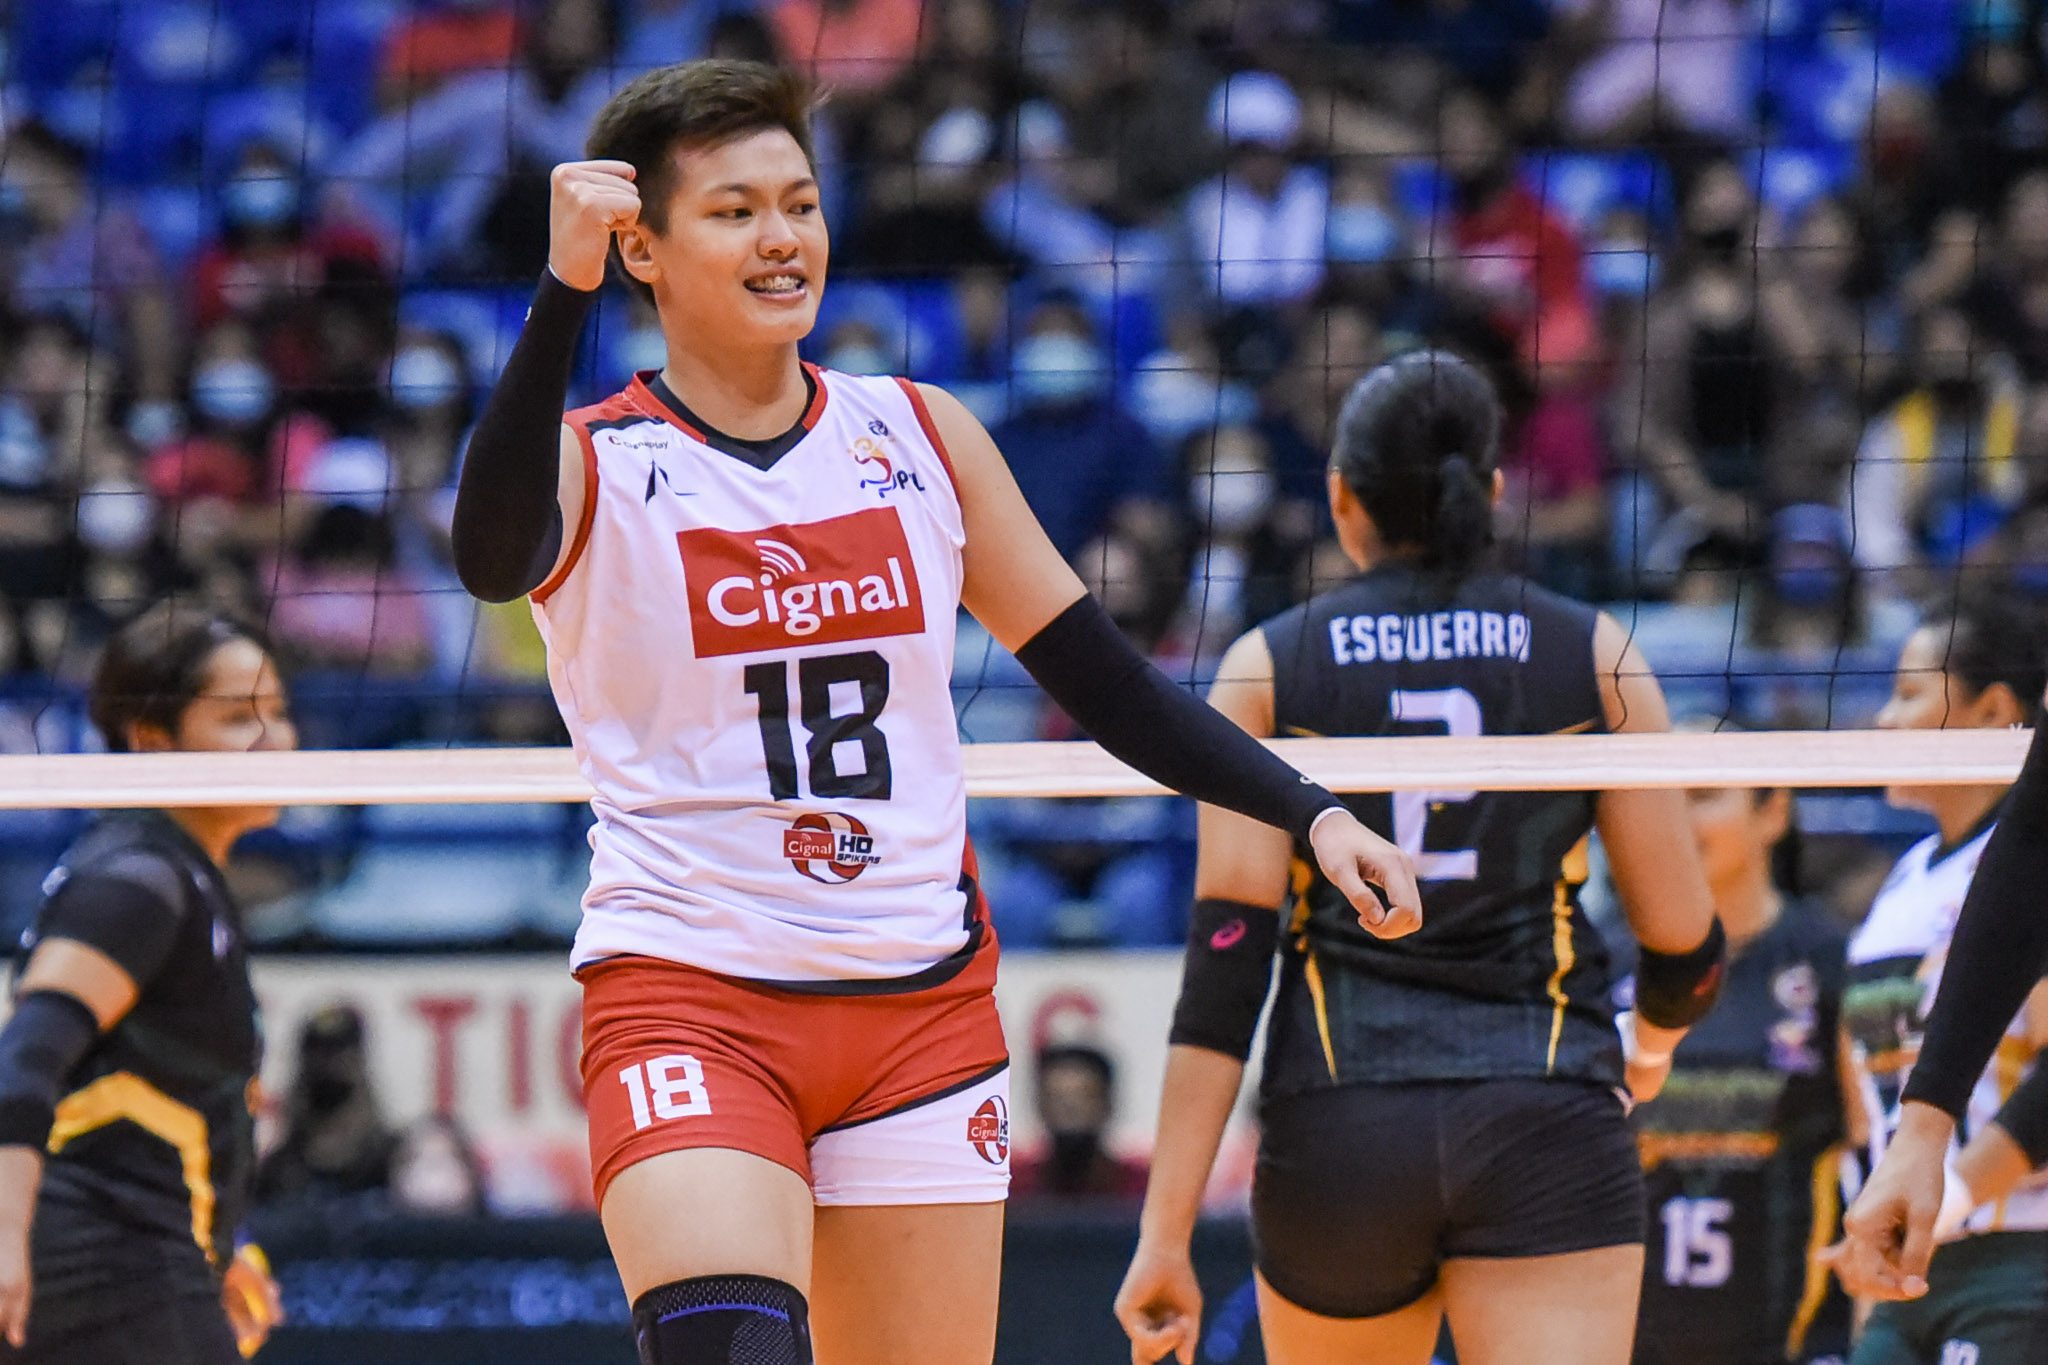 Ria Meneses carries Cignal to their last victory in the PVL Invitationals semifinals.